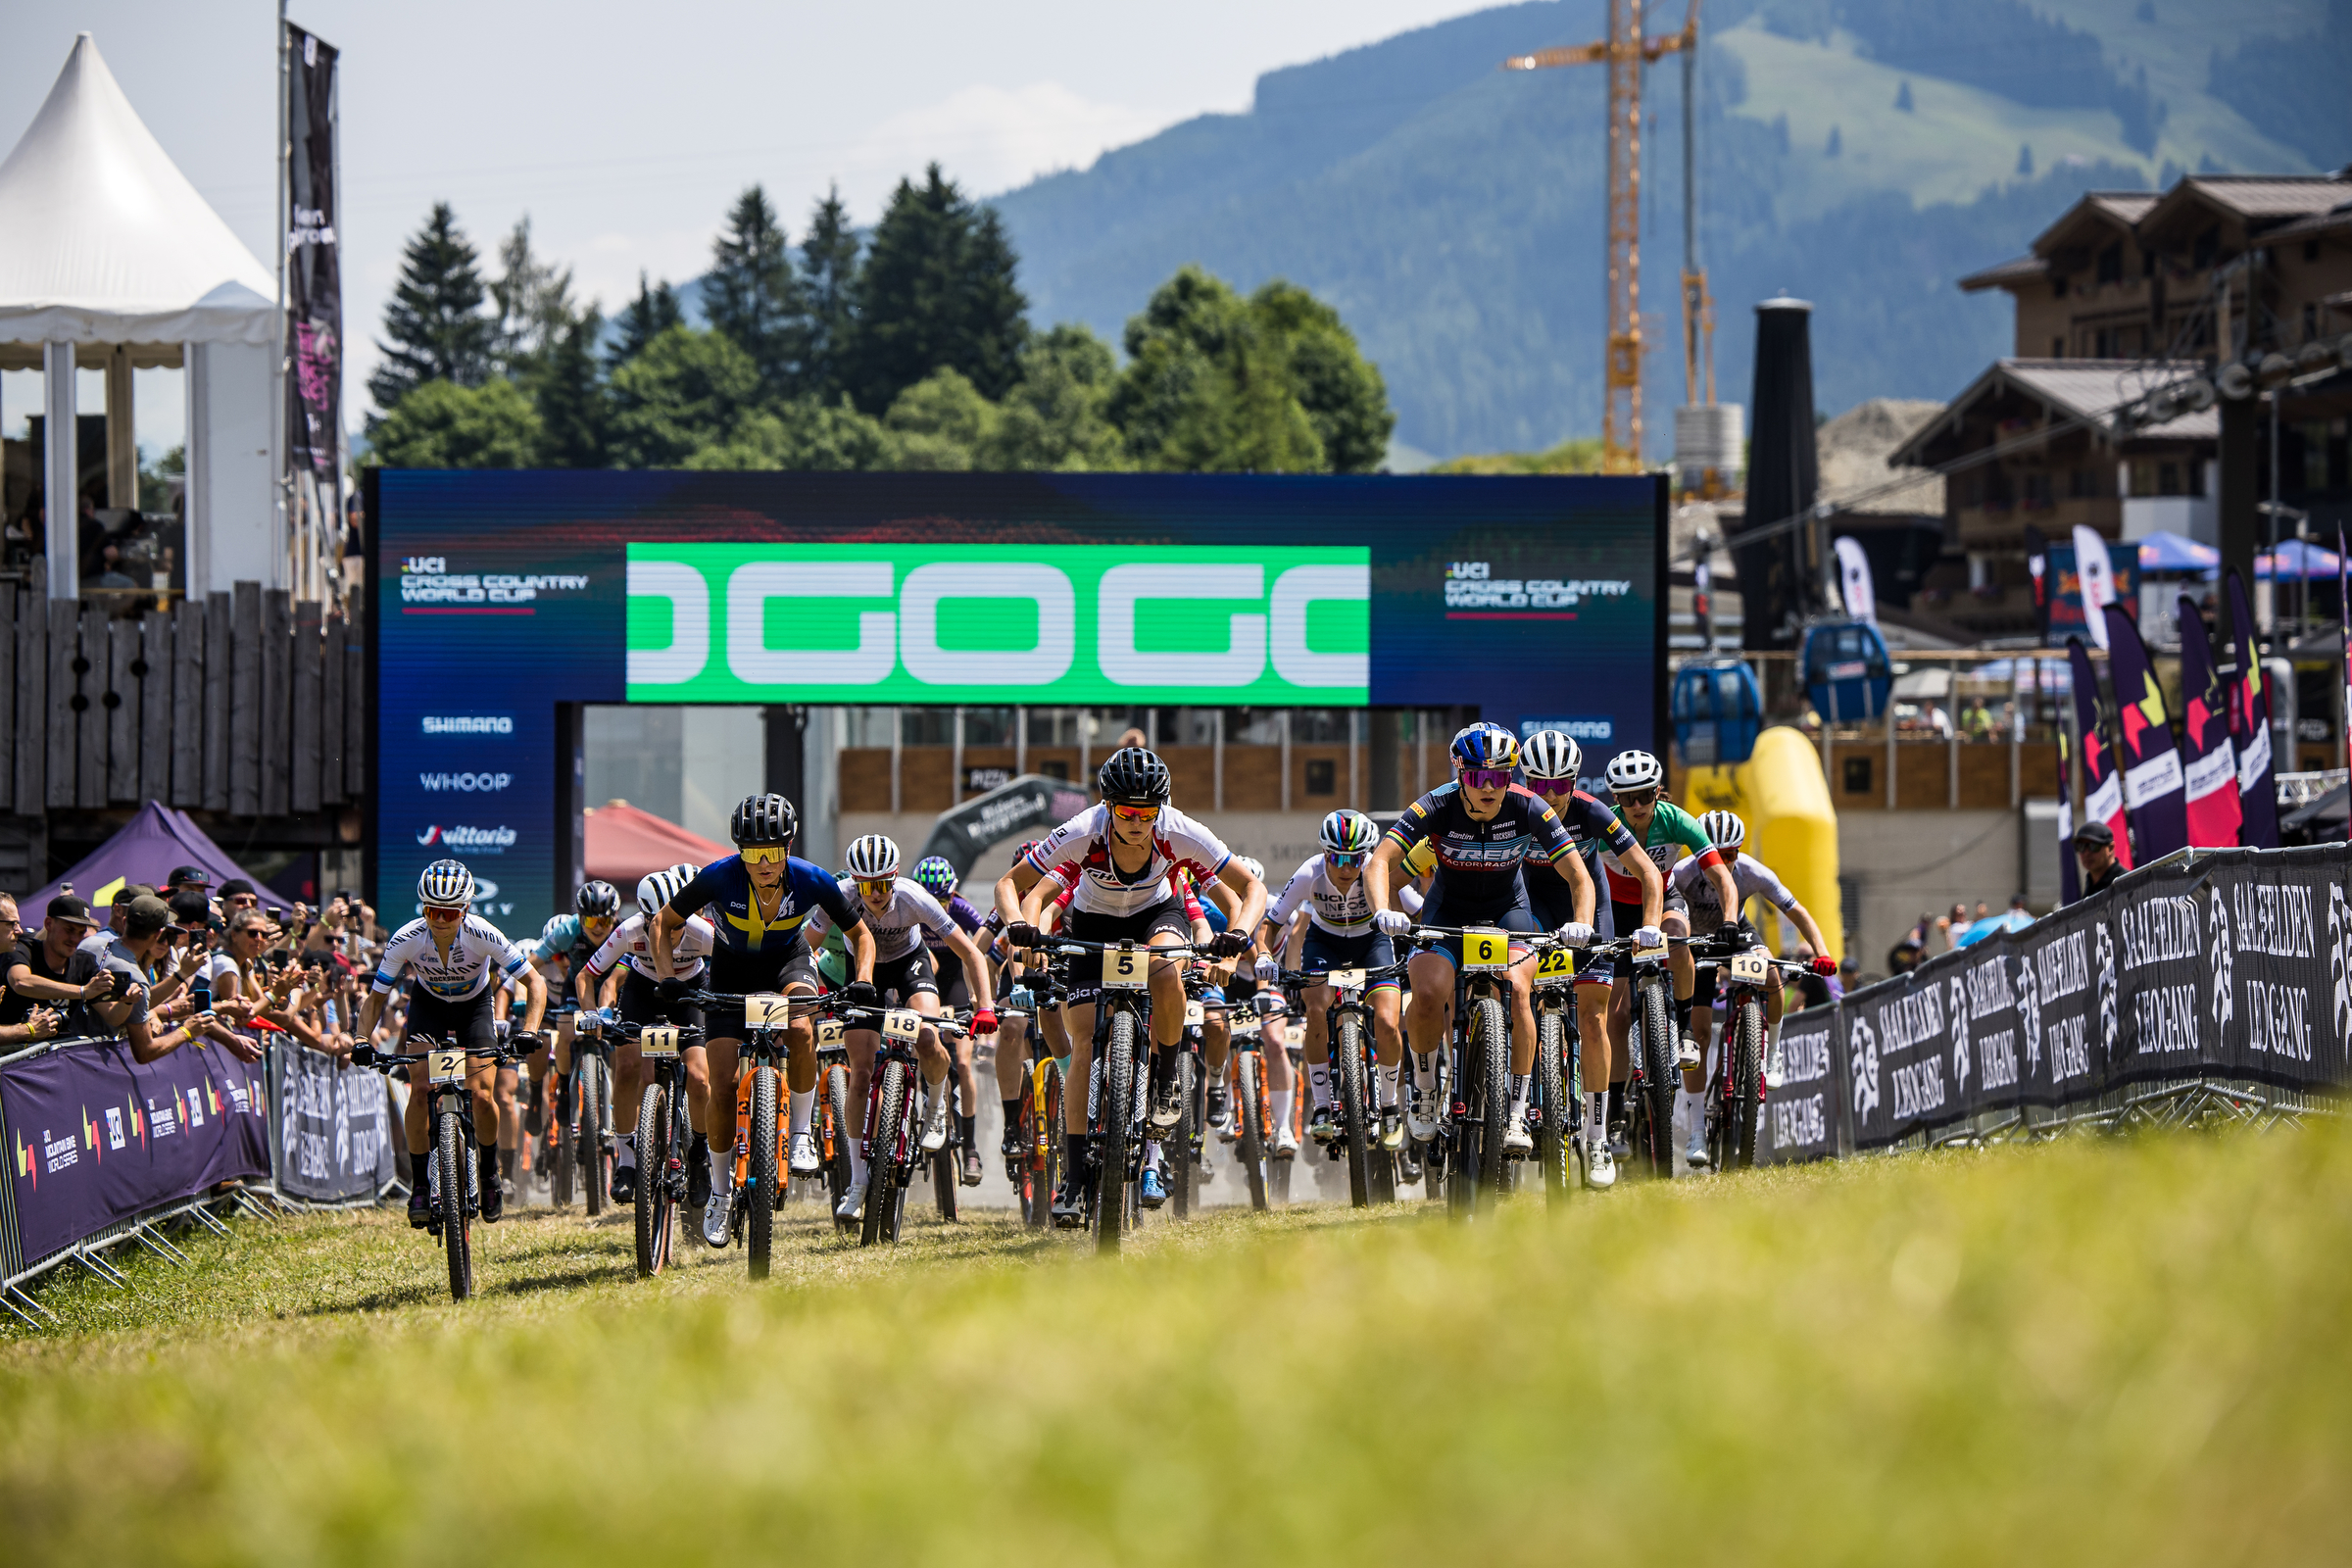 Start of the XC race in Leogang